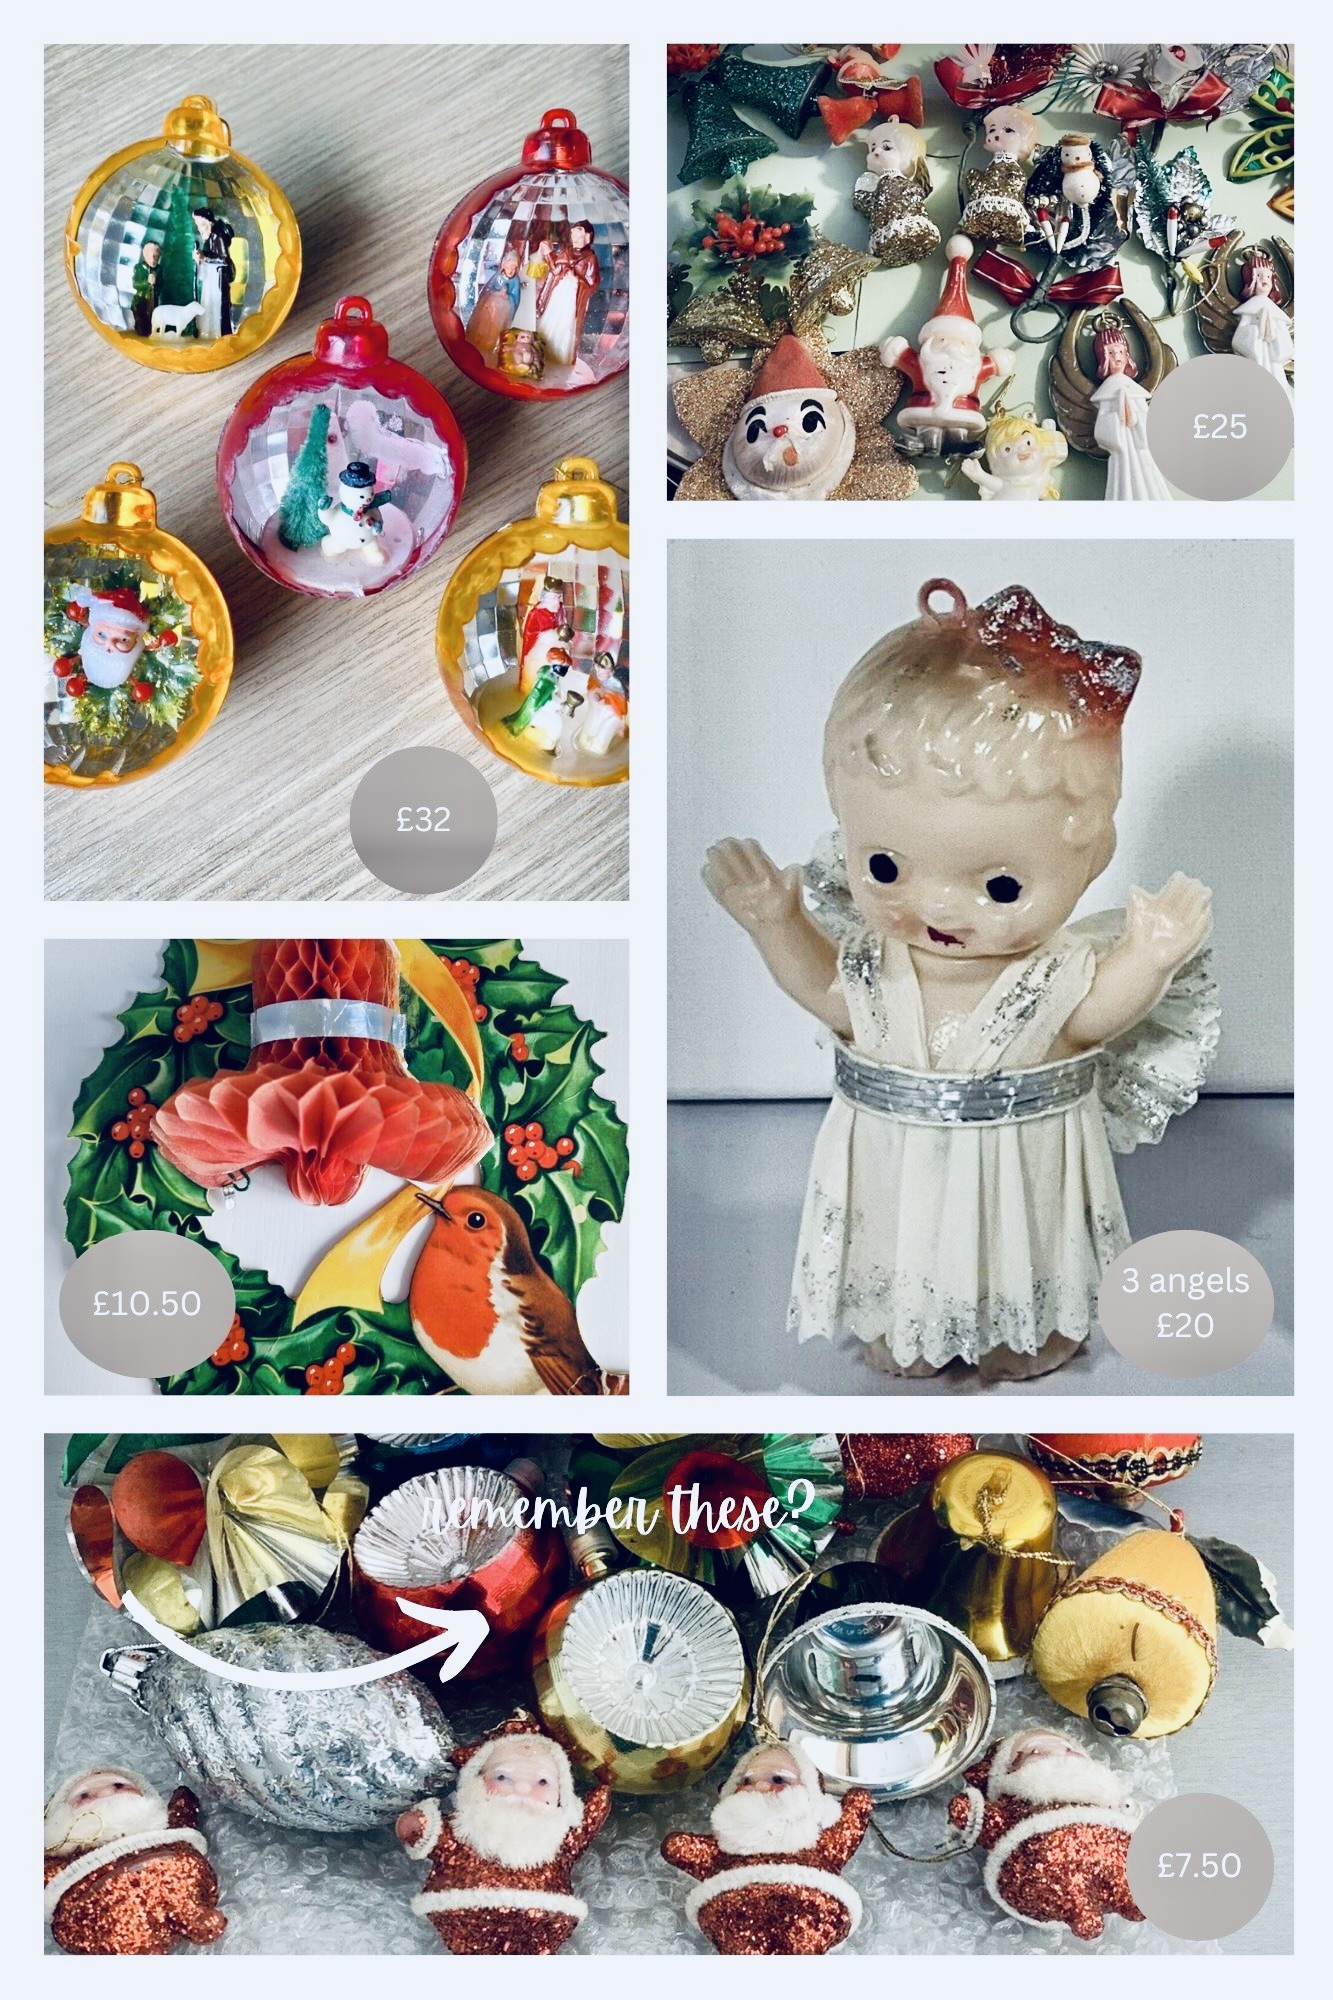 Using Collections For Vintage Christmas Decor